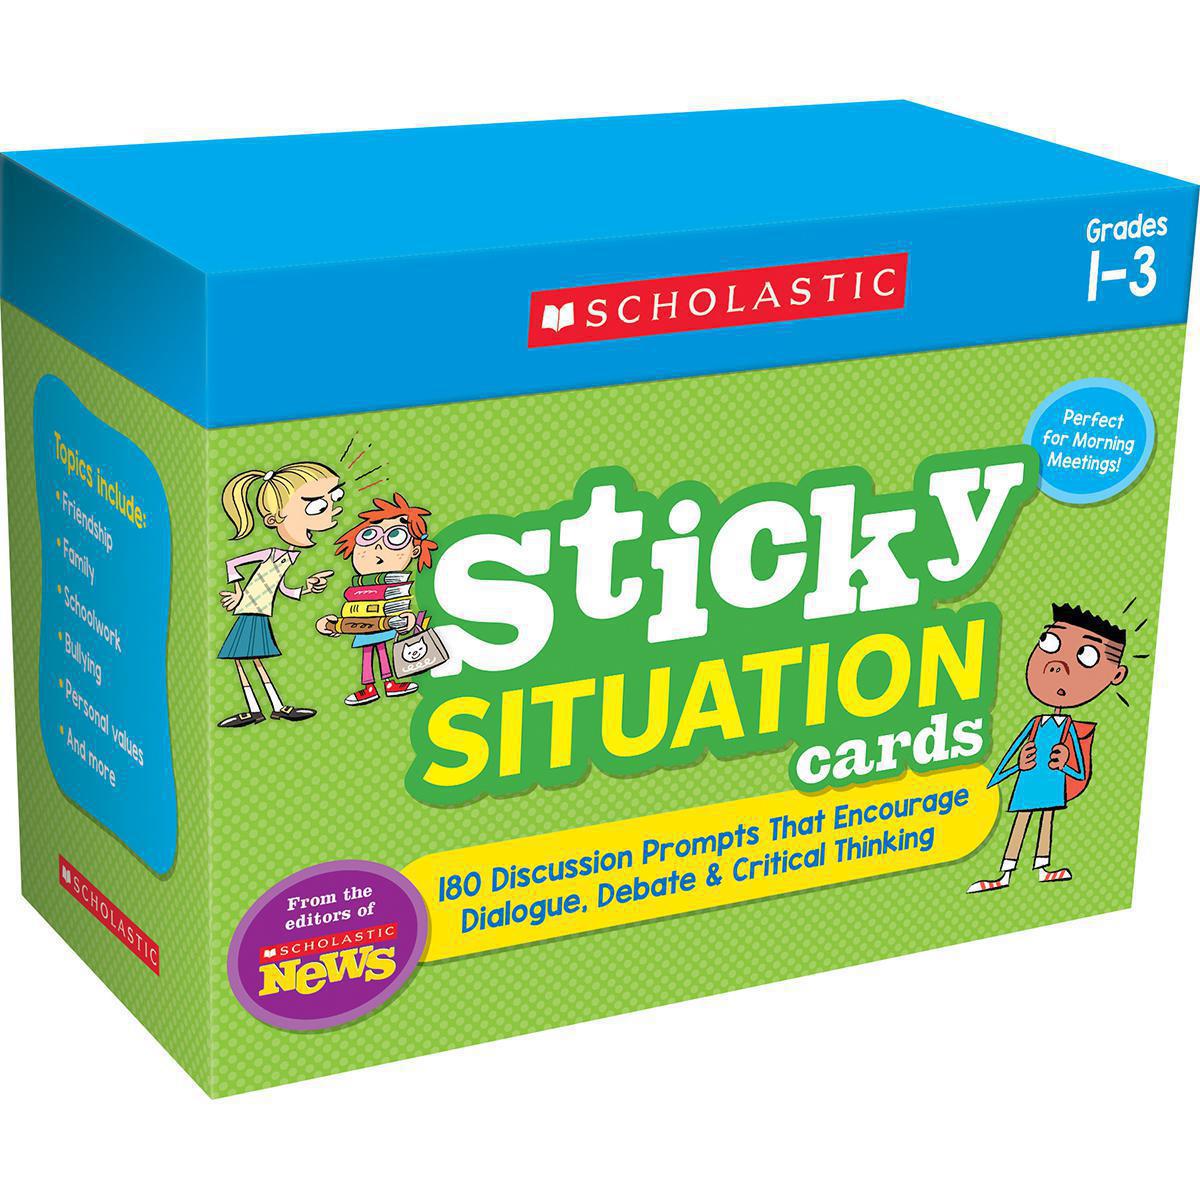  Scholastic News Sticky Situation Cards: Grades 1-3 180 Discussion Prompts That Encourage Dialogue, Debate &amp; Critical Thinking